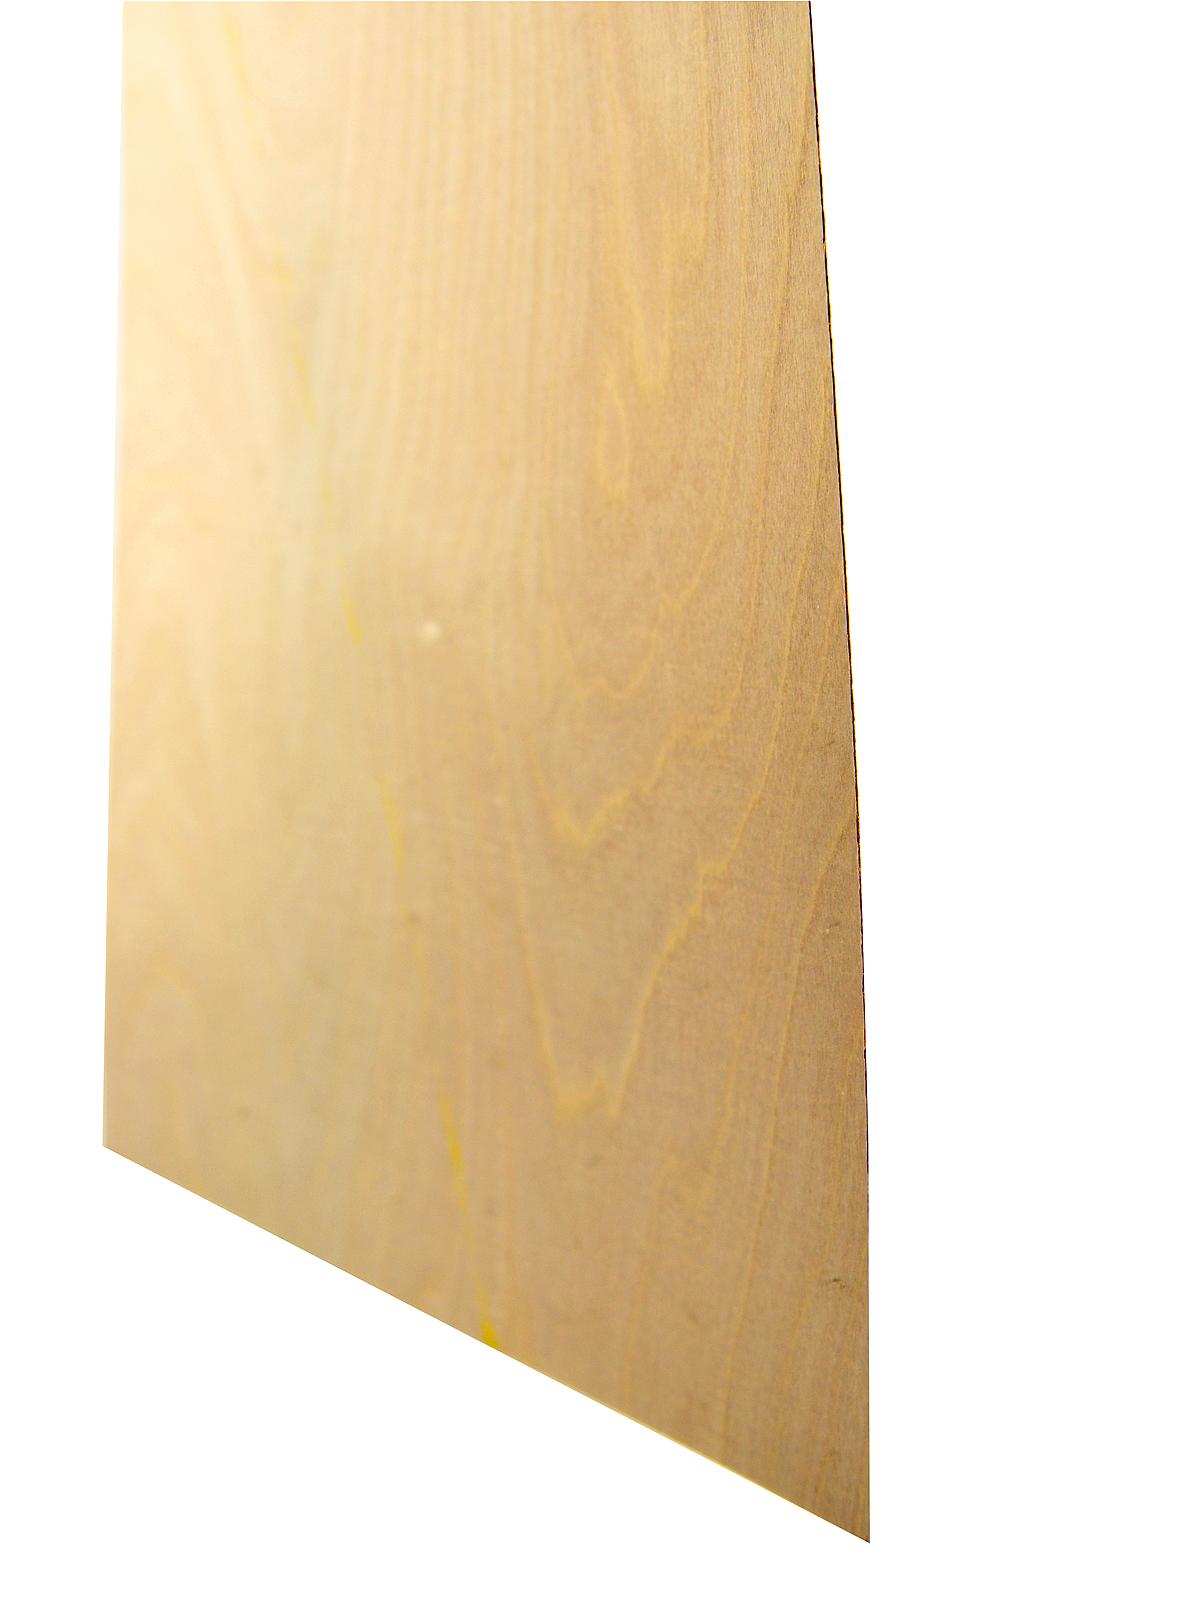 Thin Birch Plywood Aircraft Grade 1 64 In. 12 In. X 24 In.